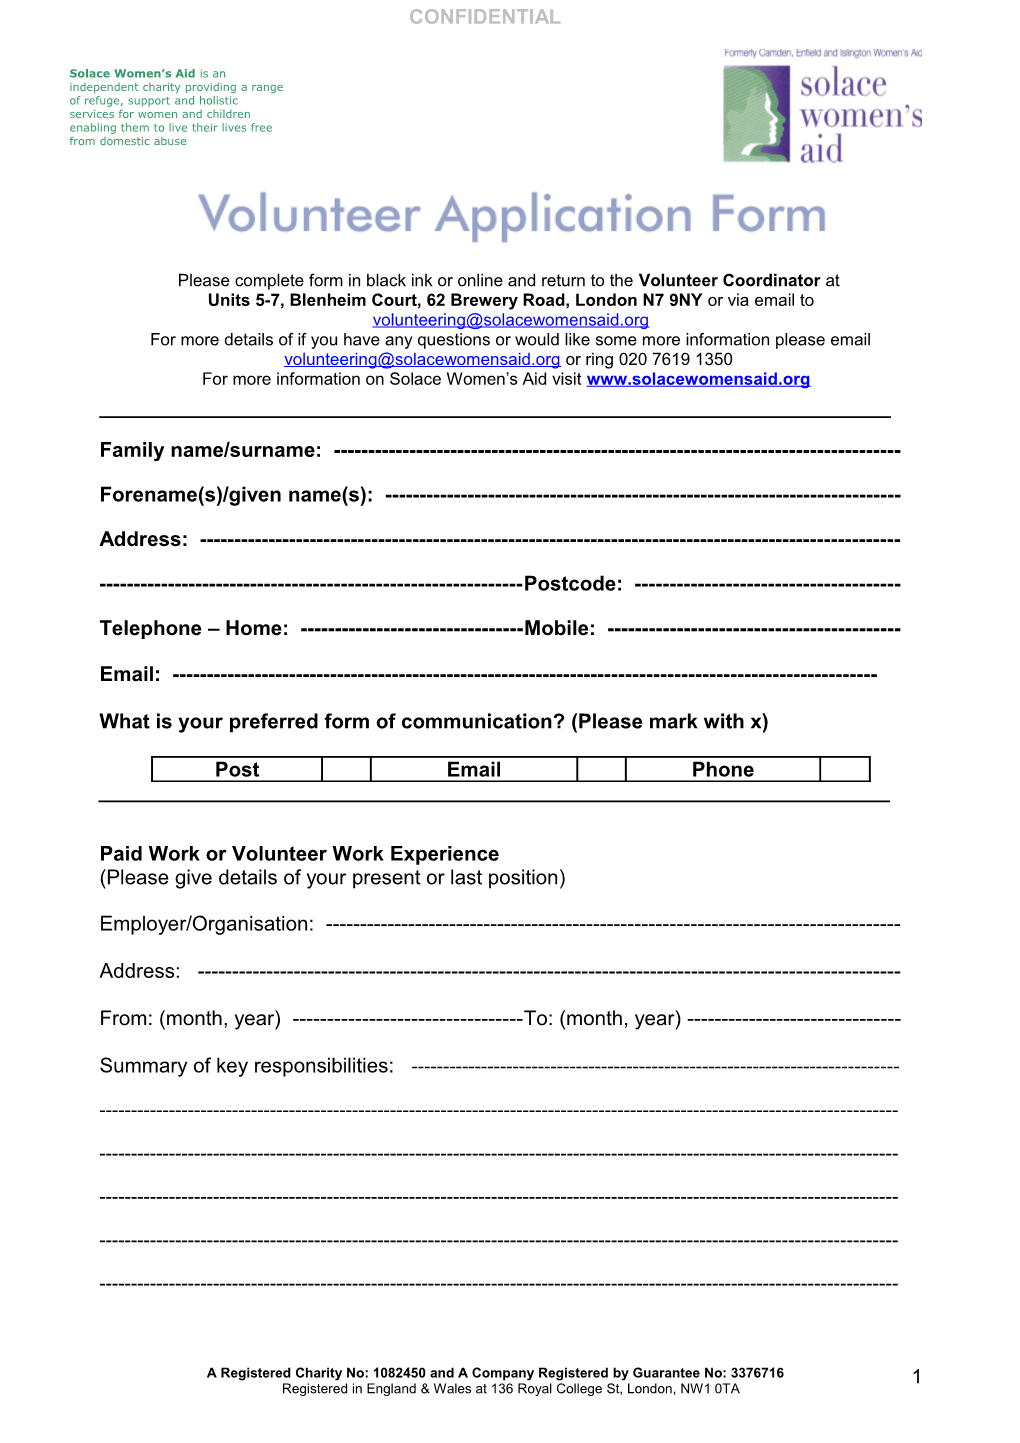 Please Complete Form in Black Ink Or Online and Return to the Volunteer Coordinator At